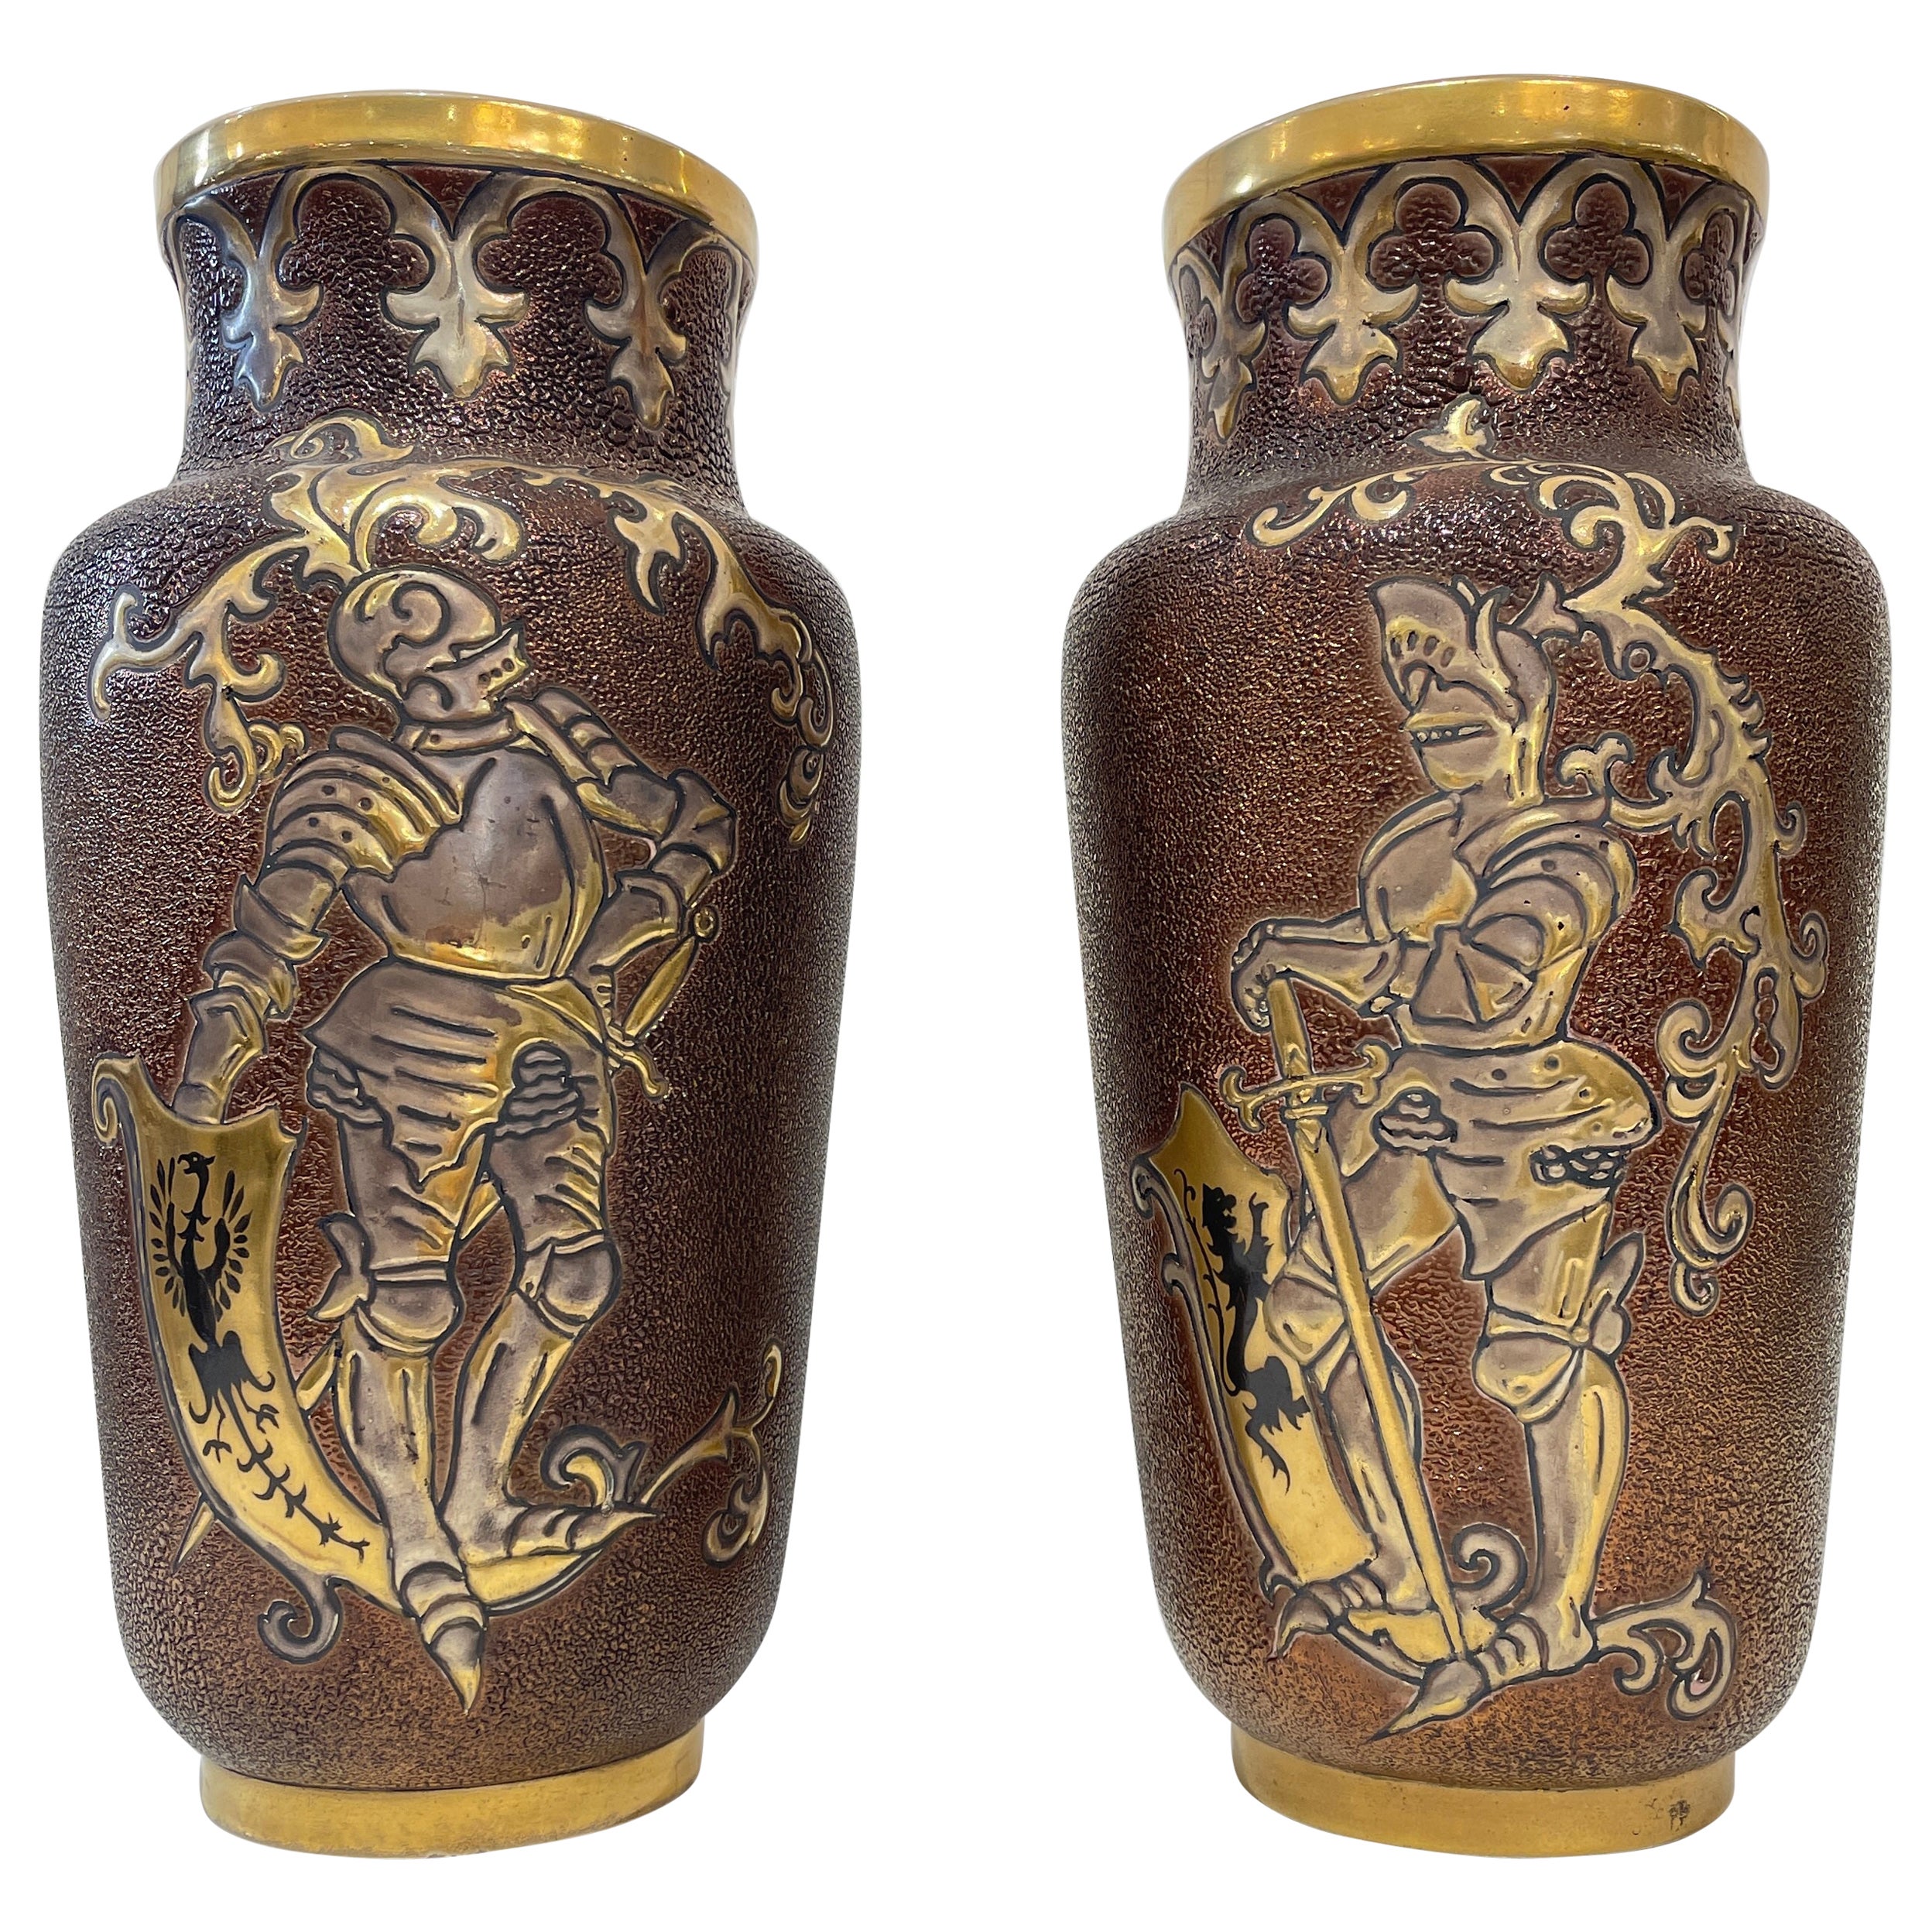 1880 Gien French Faience Pair Majolica Gold Chocolate Vases with Armored Knights For Sale